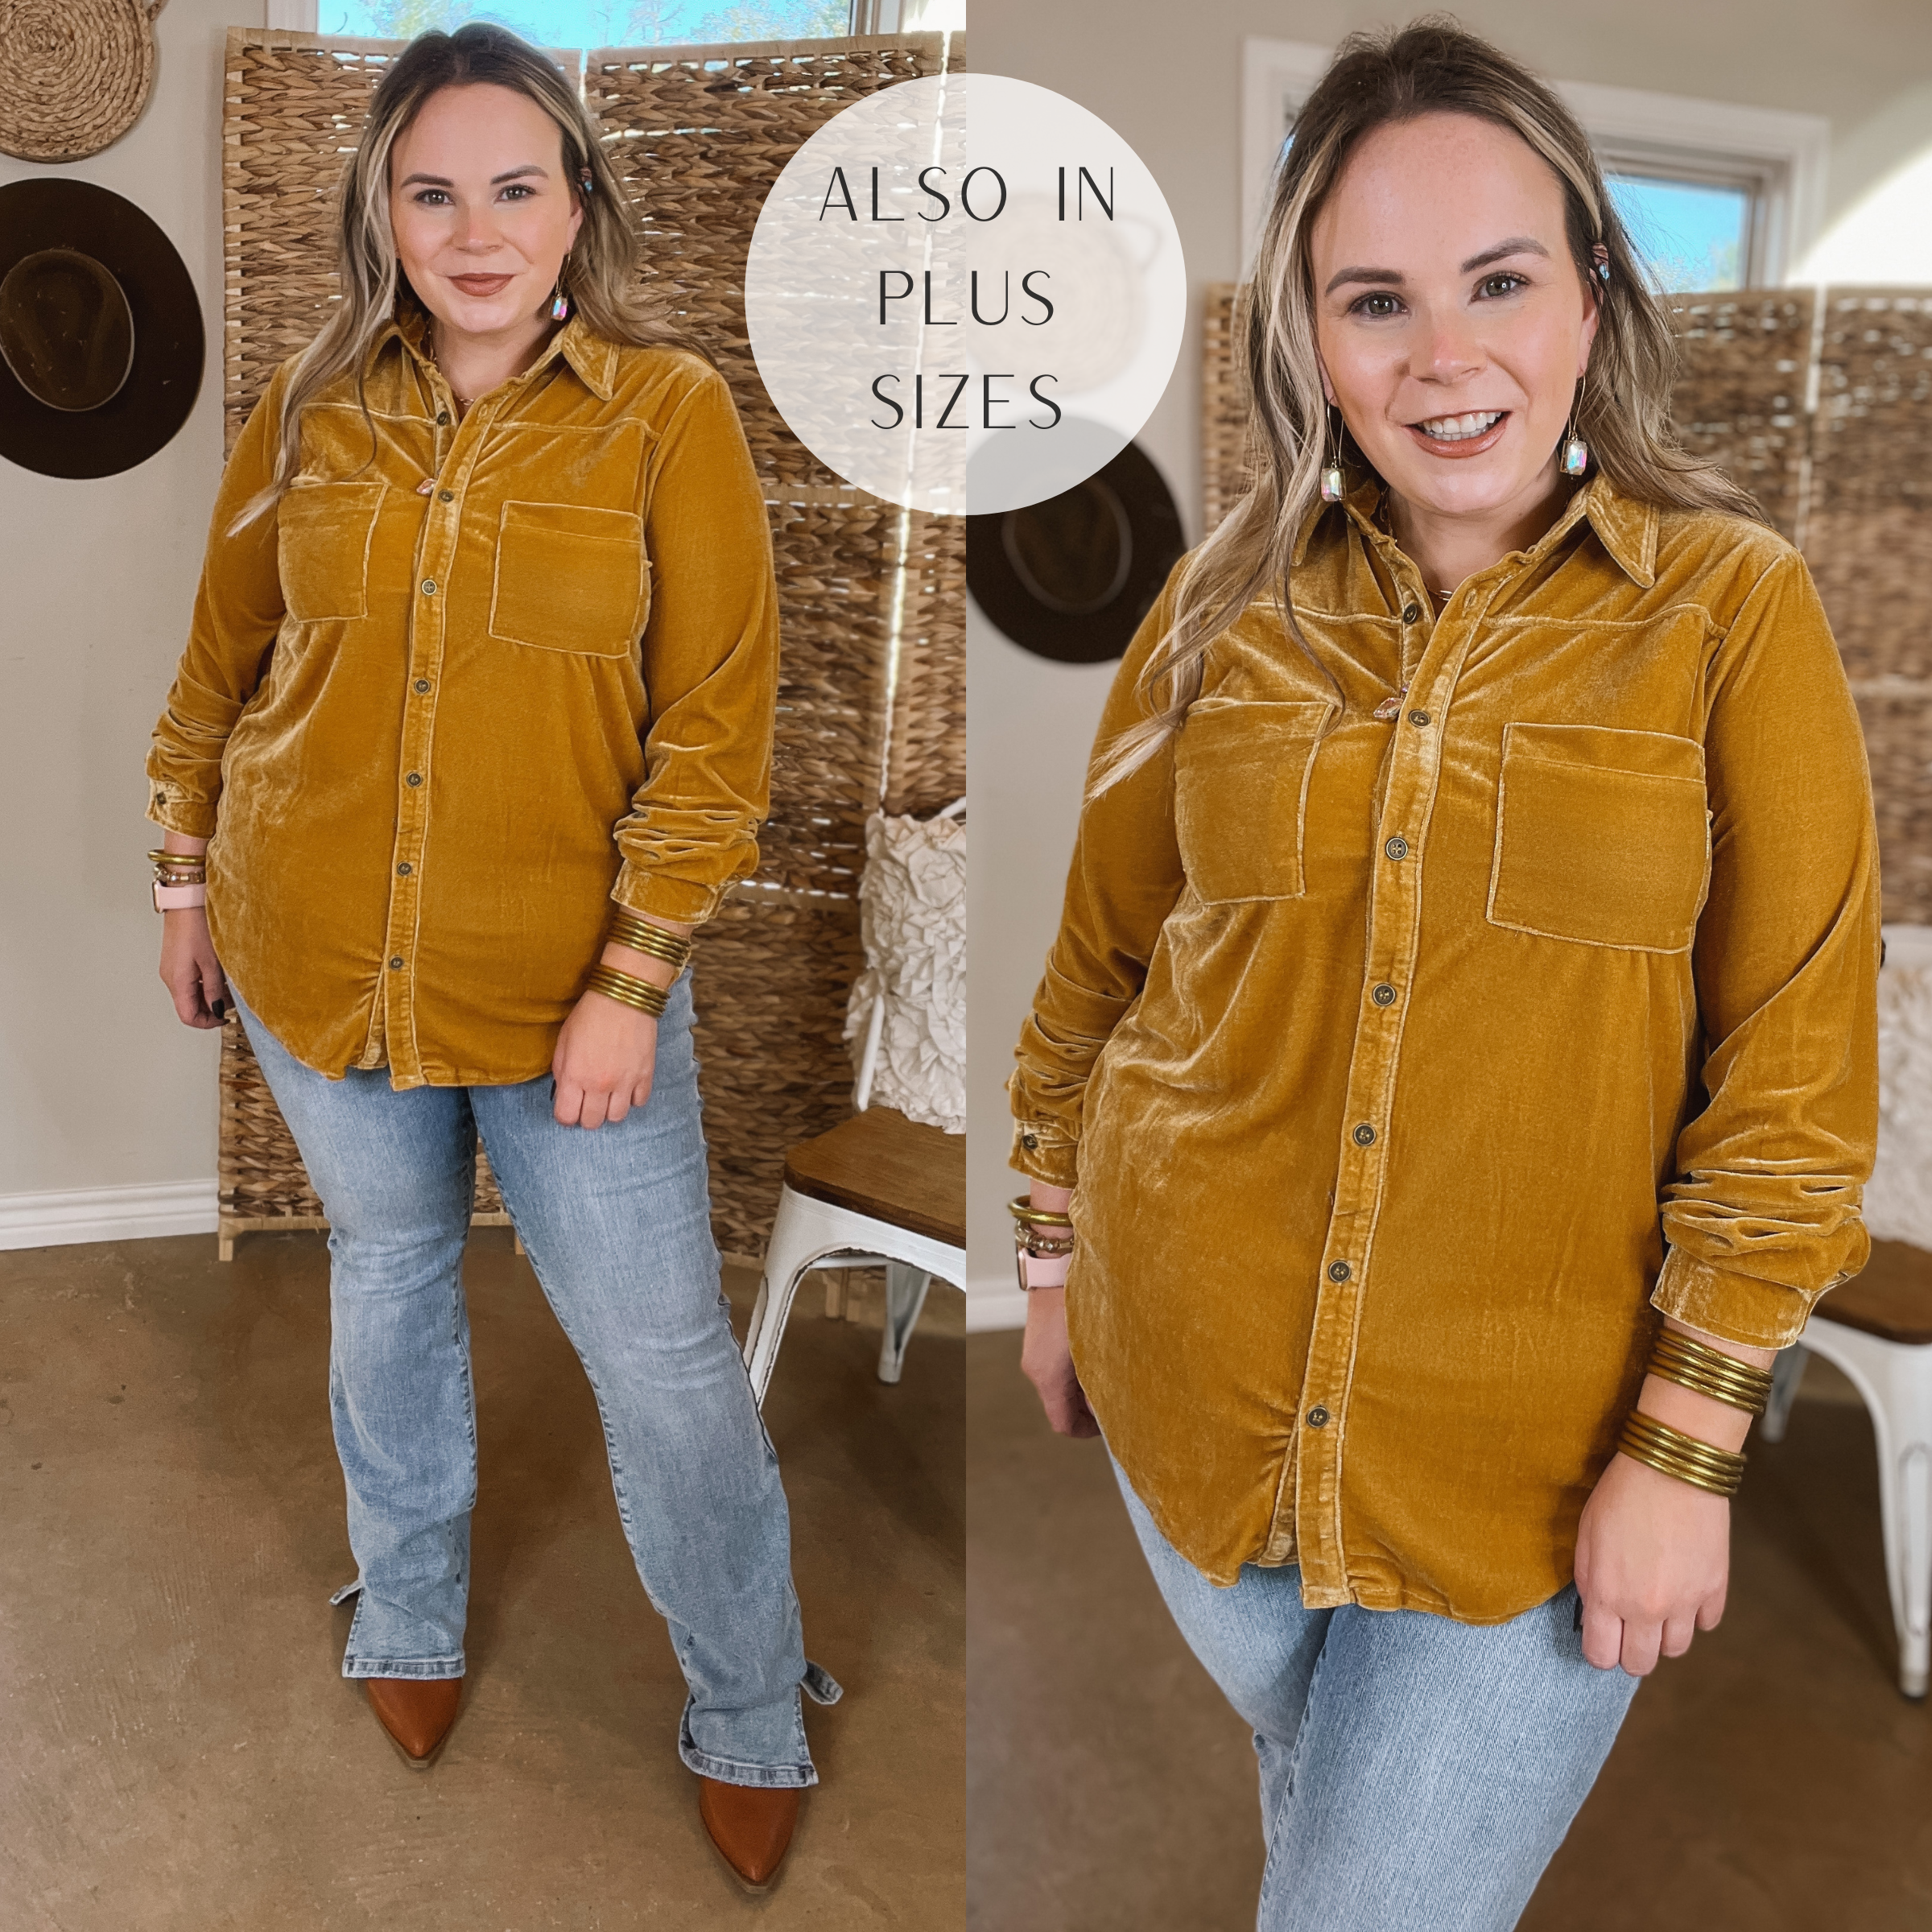 Model is wearing a mustard velvet top with long sleeves, chest pockets, a button up front, and a collared neckline. Model has it paired with light wash bootcut jeans, black booties, and gold jewelry.